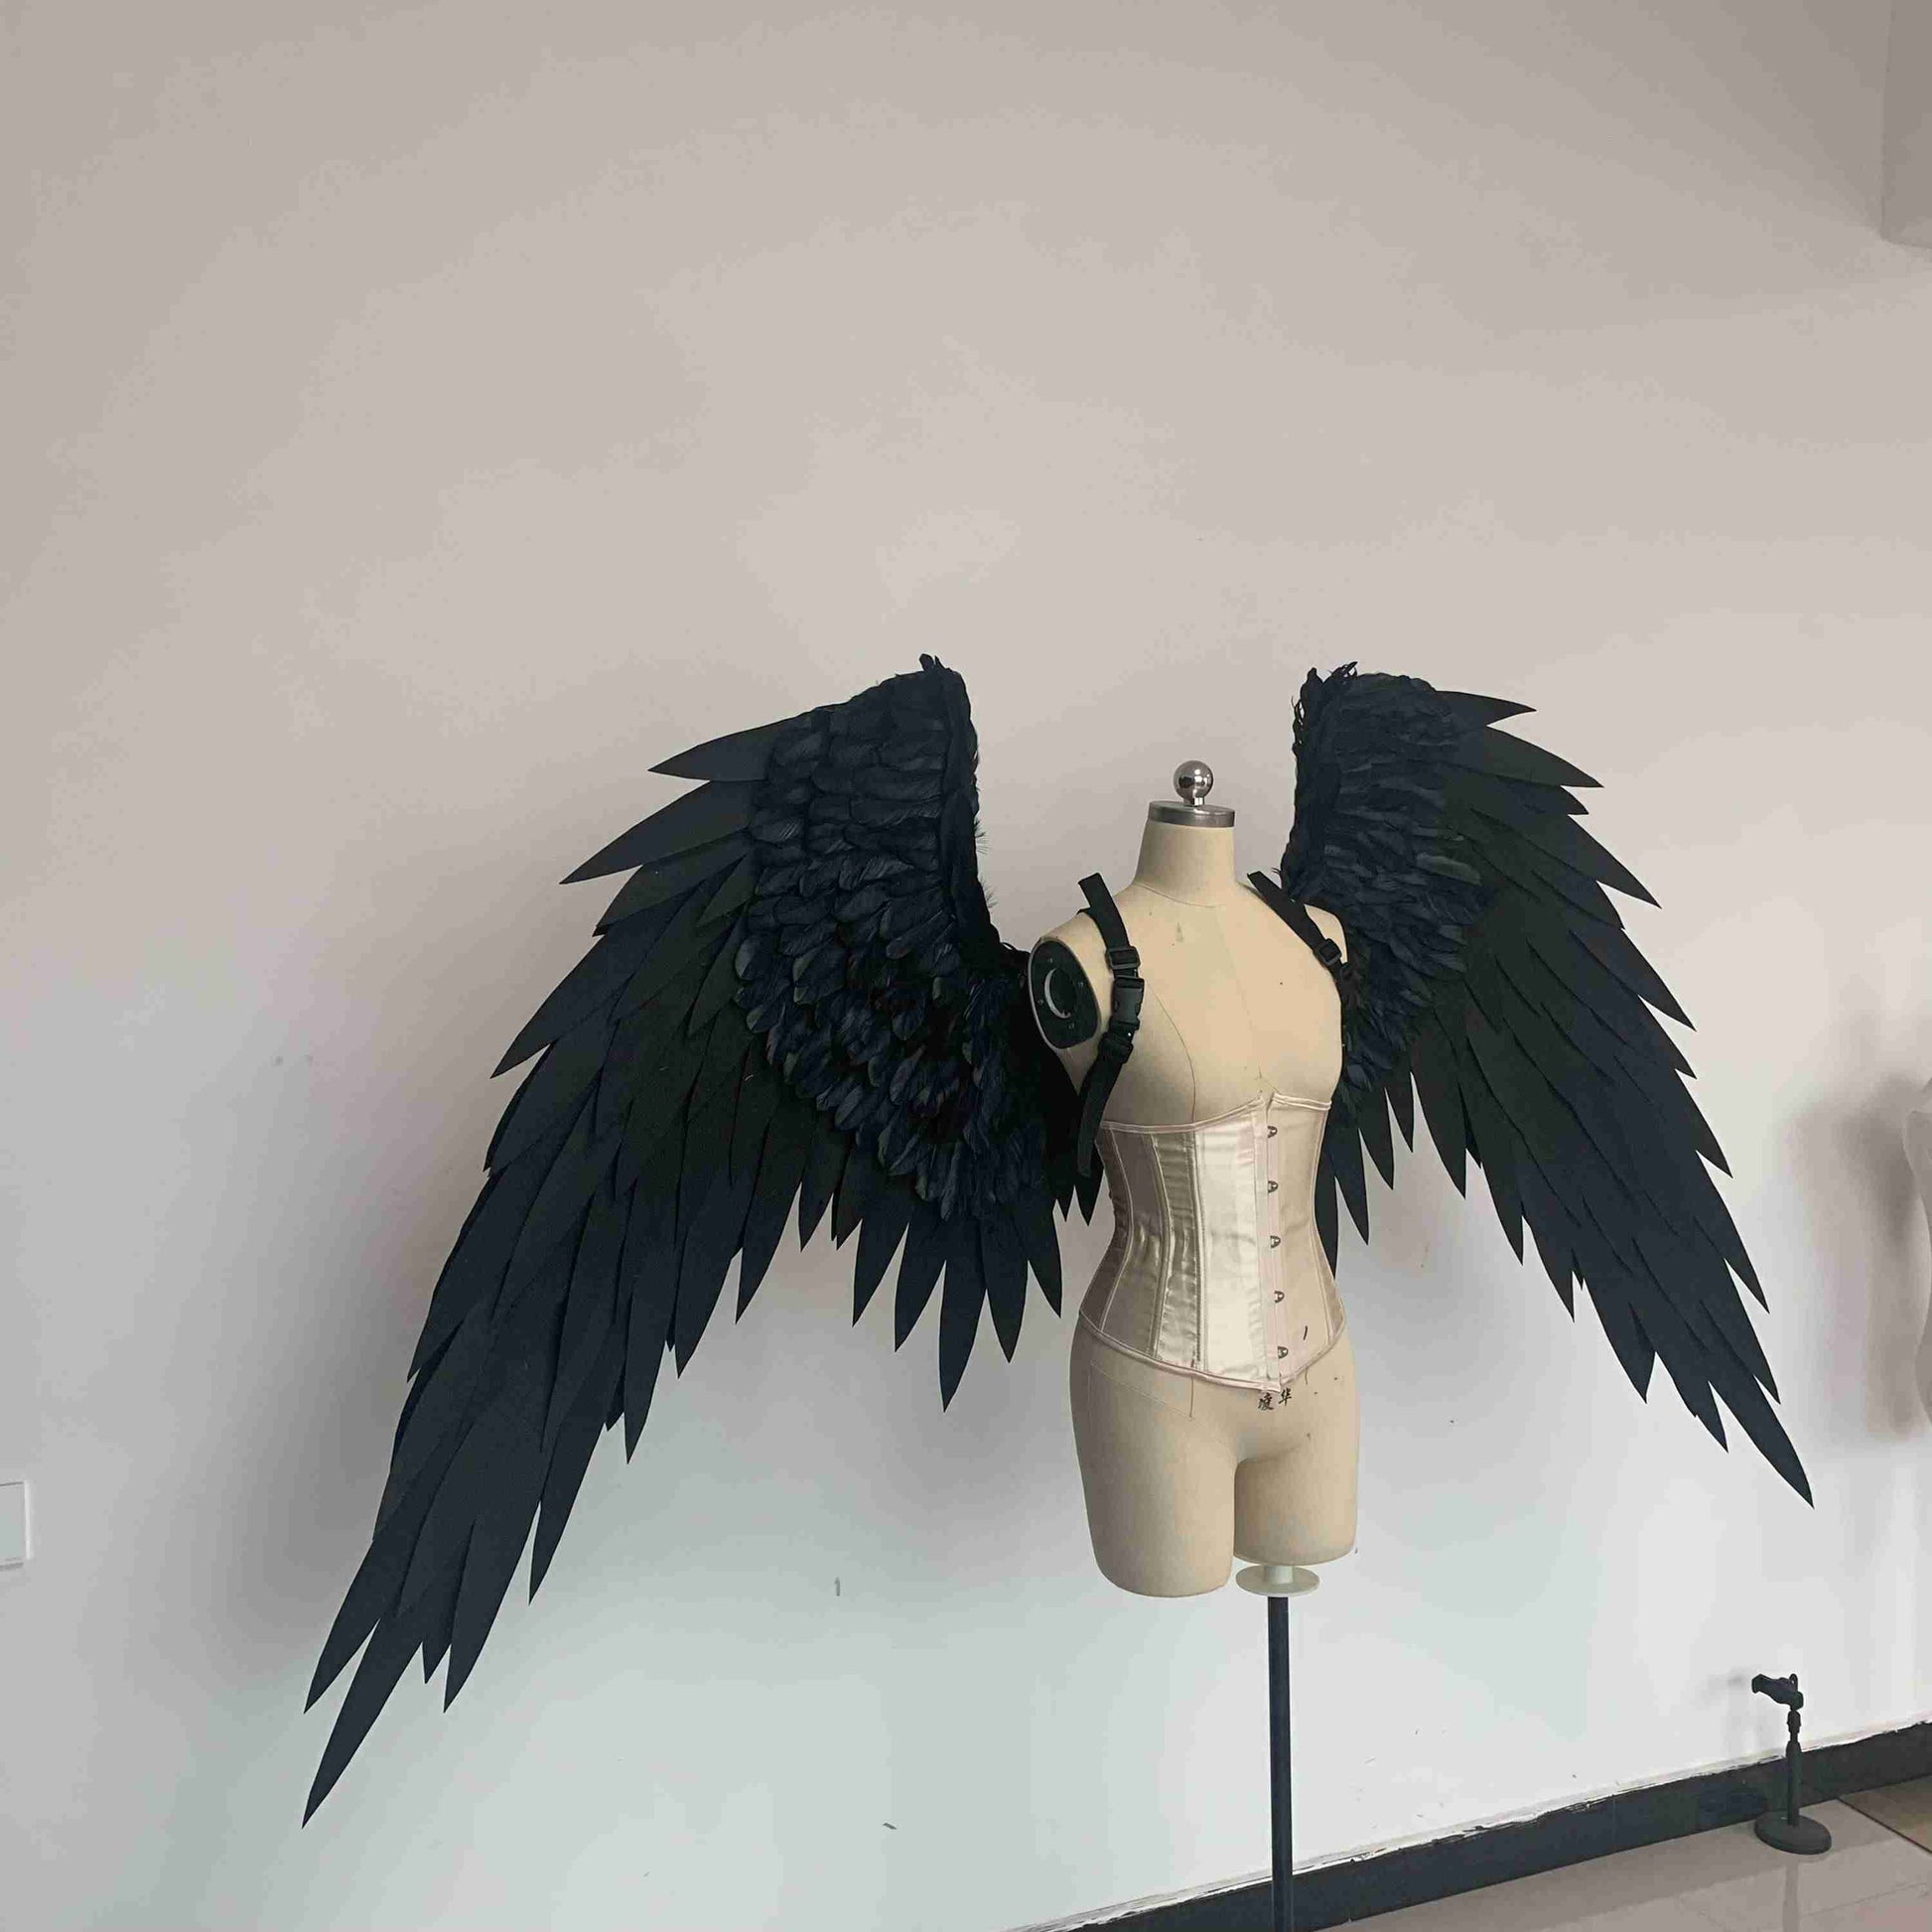 Our black color angel wings from the right side. Made from EVA foam and goose feathers. Wings for angel costume or devil costume. Suitable for photoshoots.